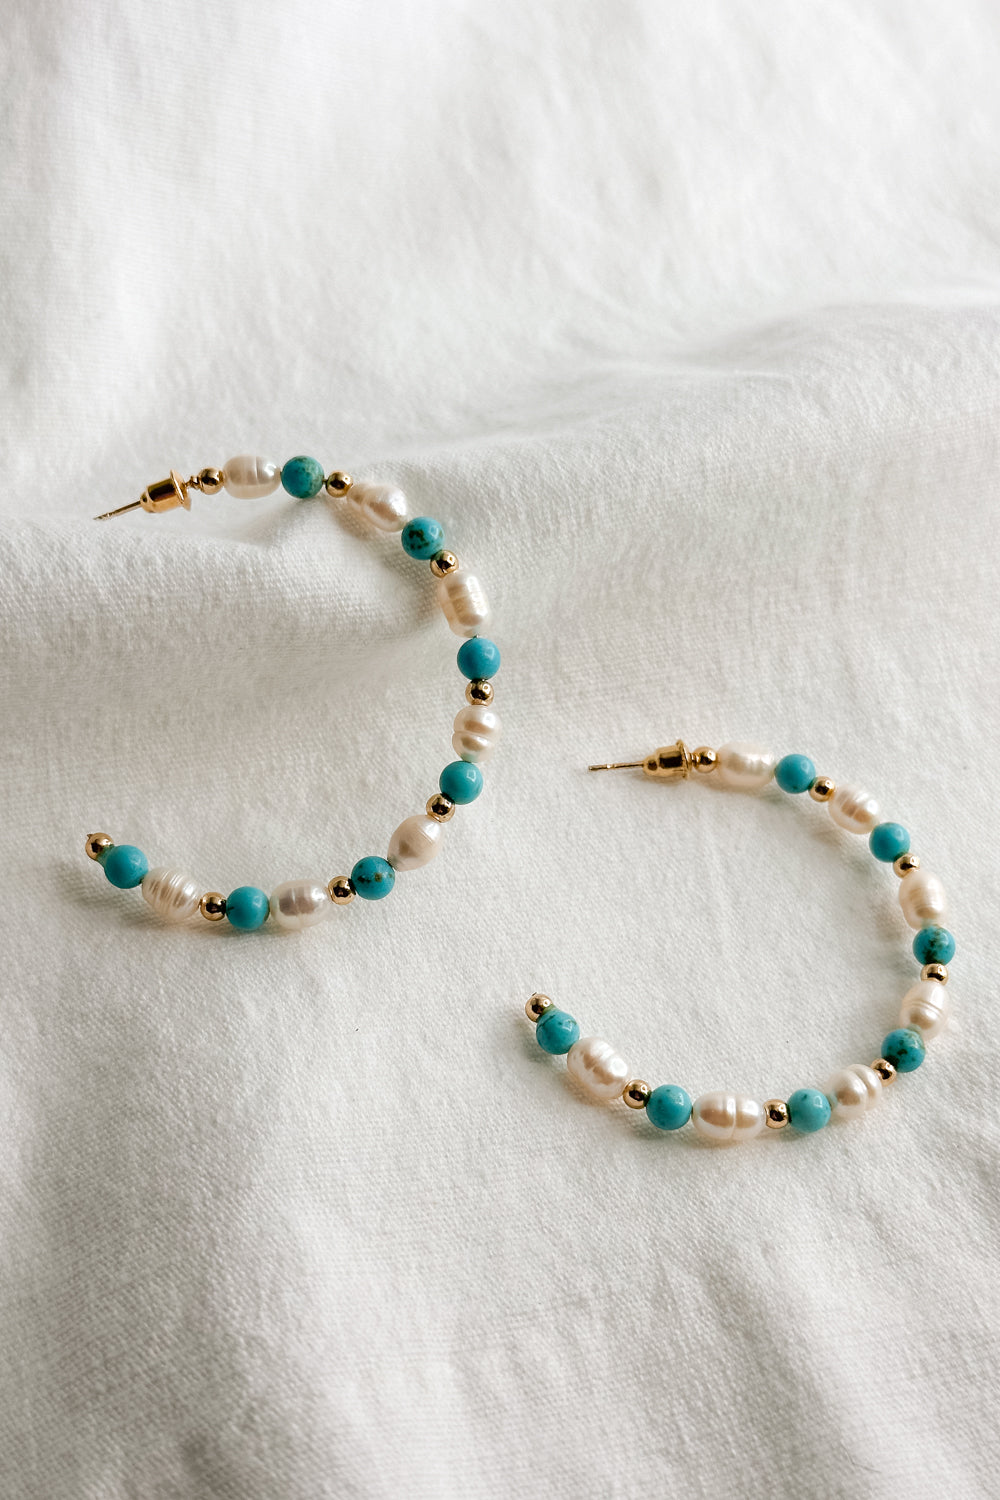 Flat lay view of the Avianna Turquoise & Pearl Hoop Earring which features  large, open hoops with gold, turquoise and pearl beads